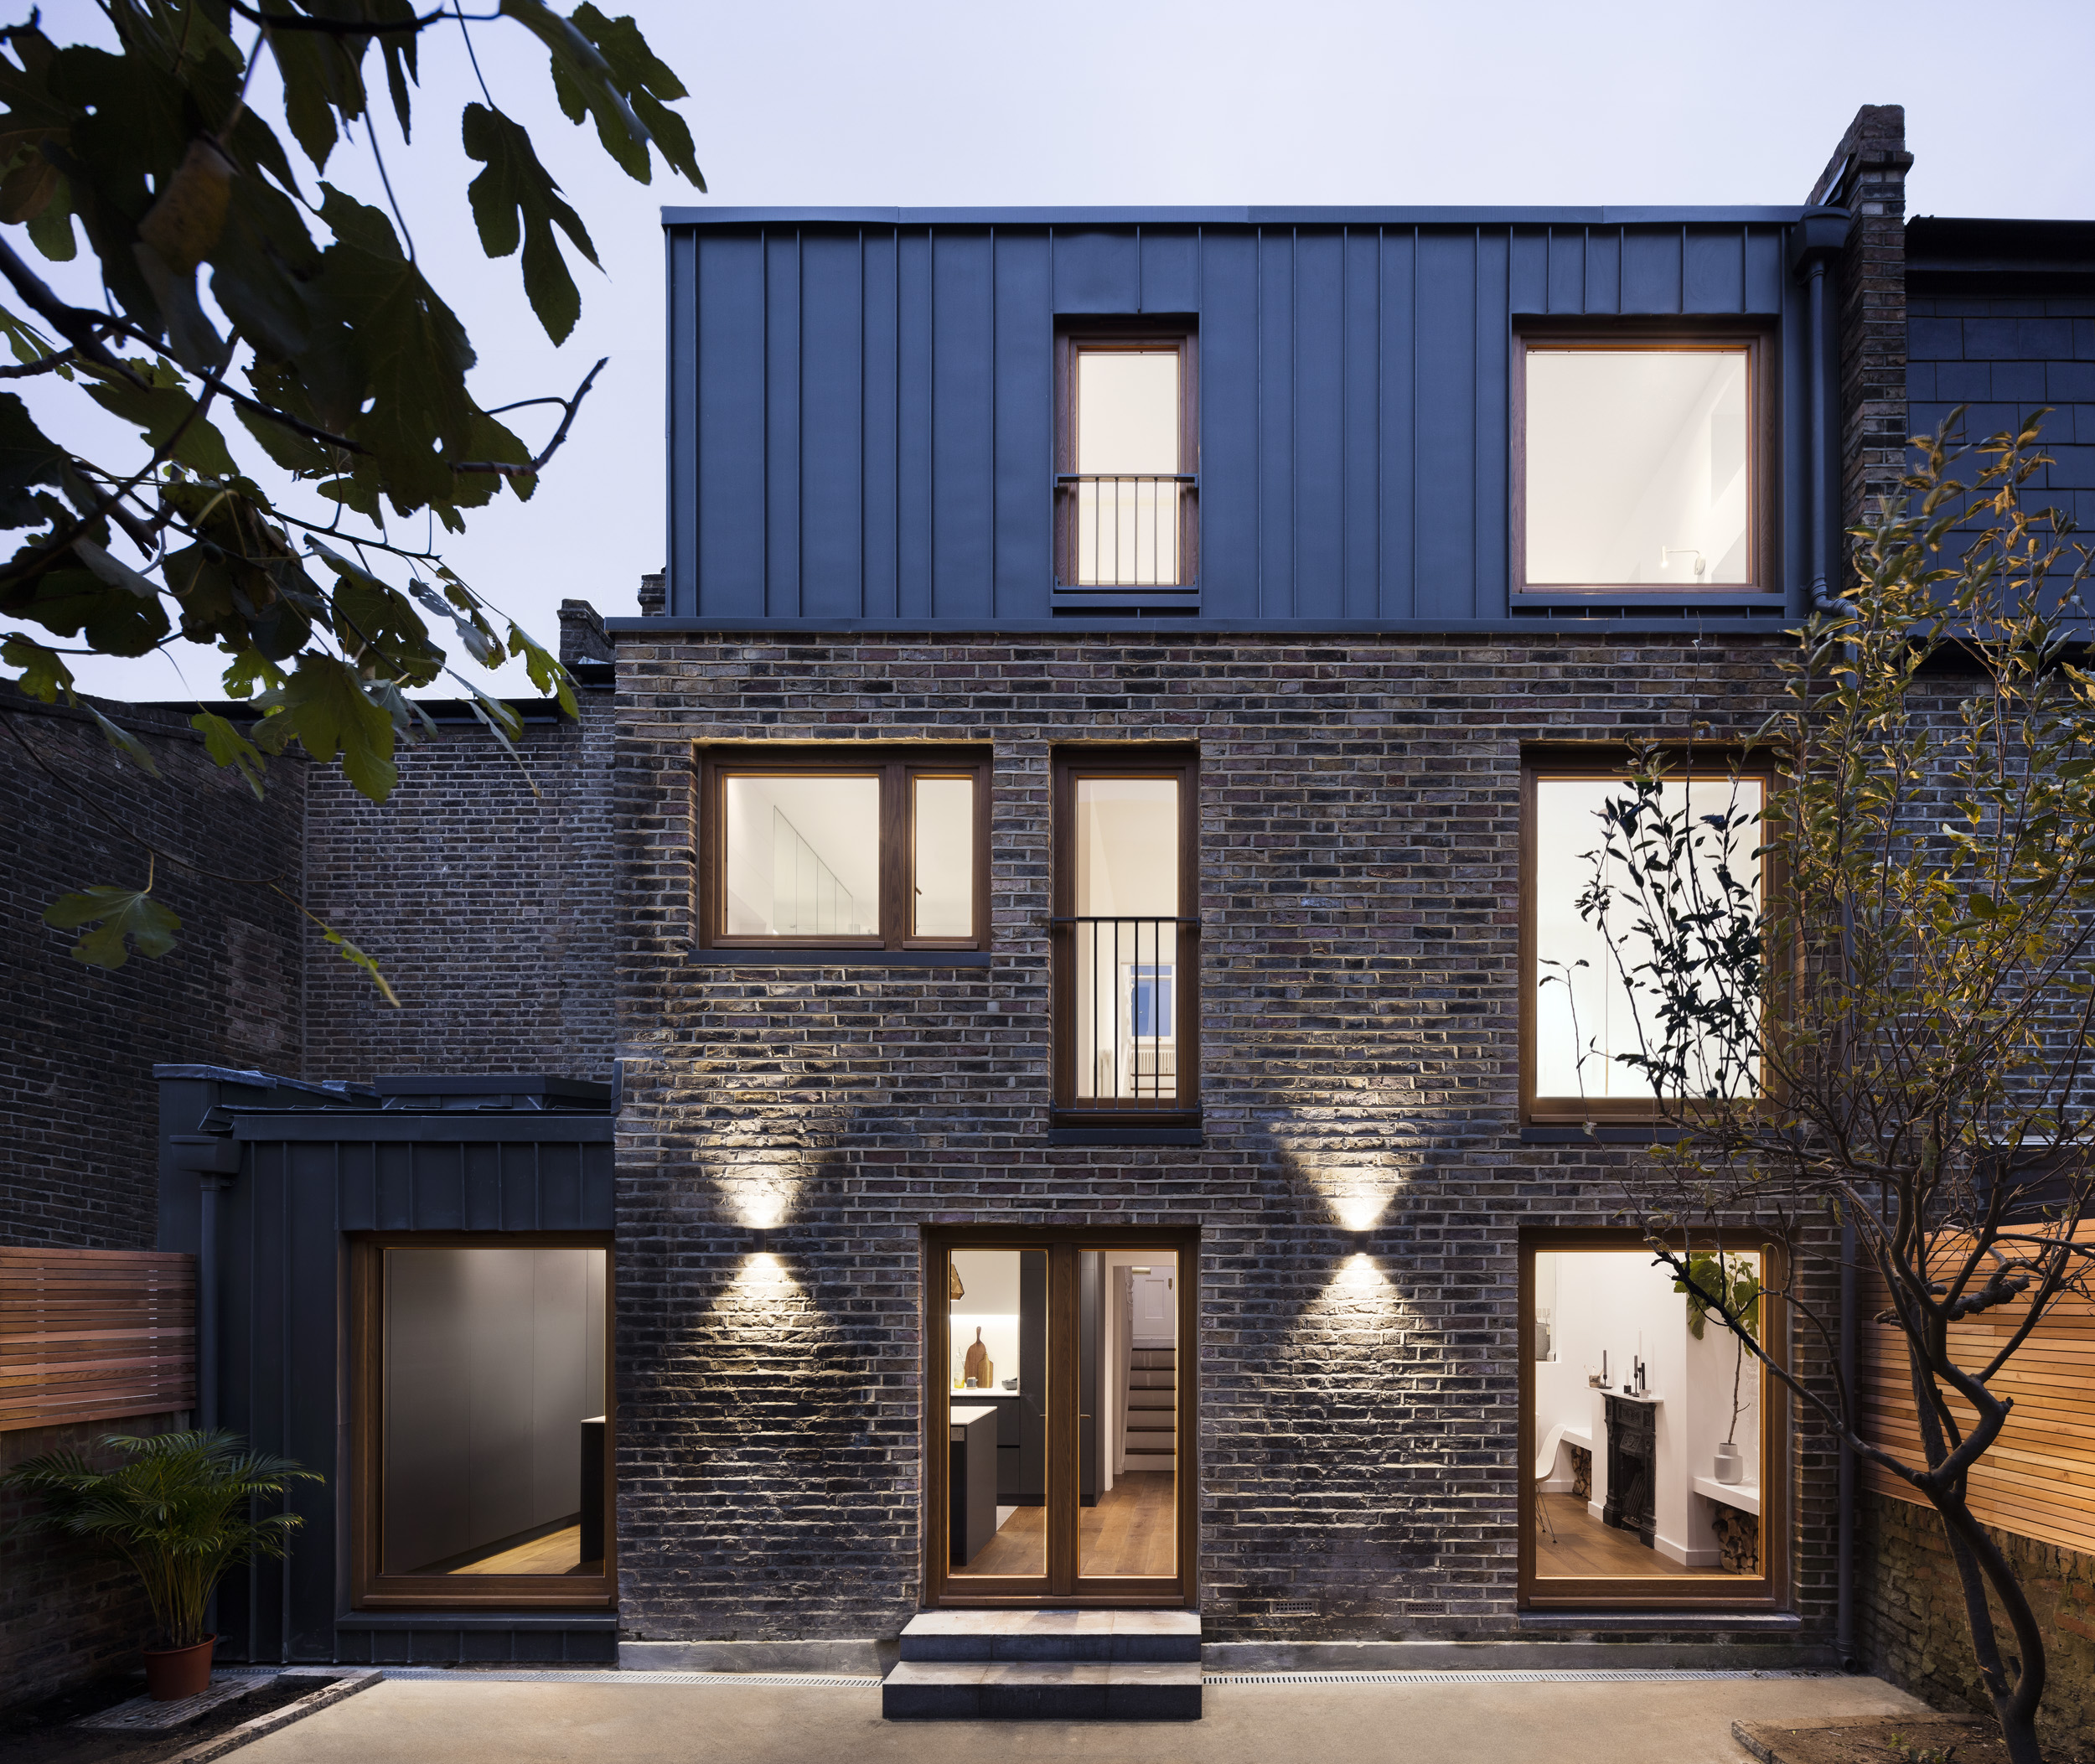 </p> <p>Find your ideal home design pro on designfor-me.com - get matched and see who's interested in your home project. Click image to see more inspiration from our design pros</p> <p>Design by Amos, architect from Islington, London</p> <p>#architecture #homedesign #modernhomes #homeinspiration #sideextensions #sidereturn #sideextensionideas #loftextensions #loftextensiondesign </p> <p>